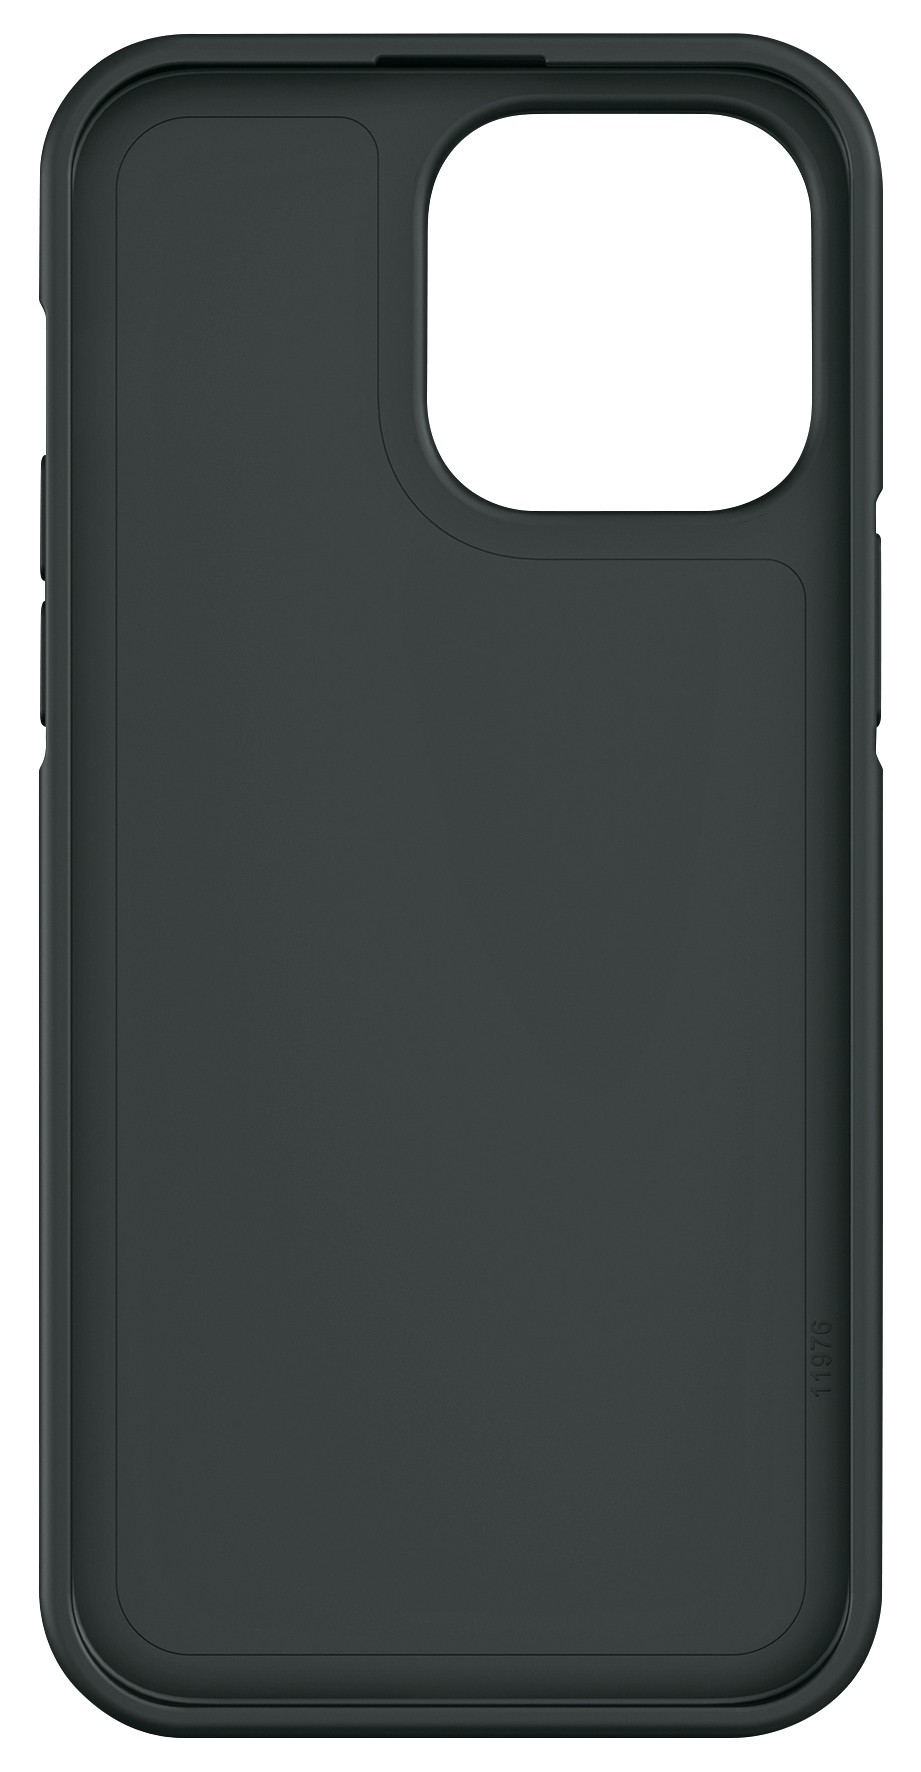 RS2175_12016_iphone_15_pro_max_inside_front